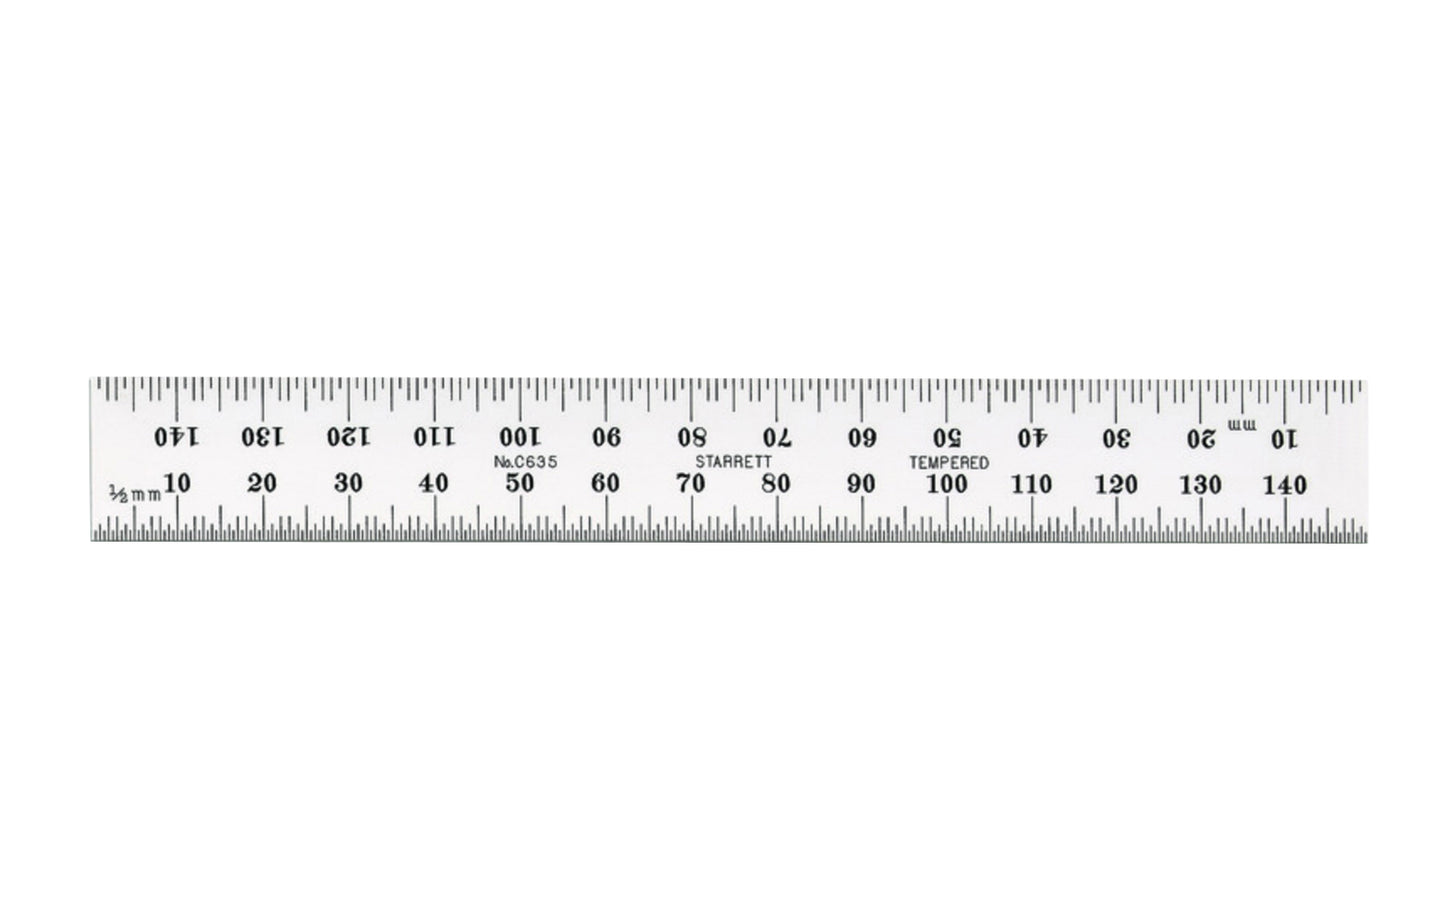 Starrett 6" Metric Rule - 1.0 mm, 0.5 mm Grads. The Starrett 150mm (6") Steel Rule with Millimeter Graduation features a satin chrome finish. Graduations at mm and 1/2mm on both sides.   Made in USA.